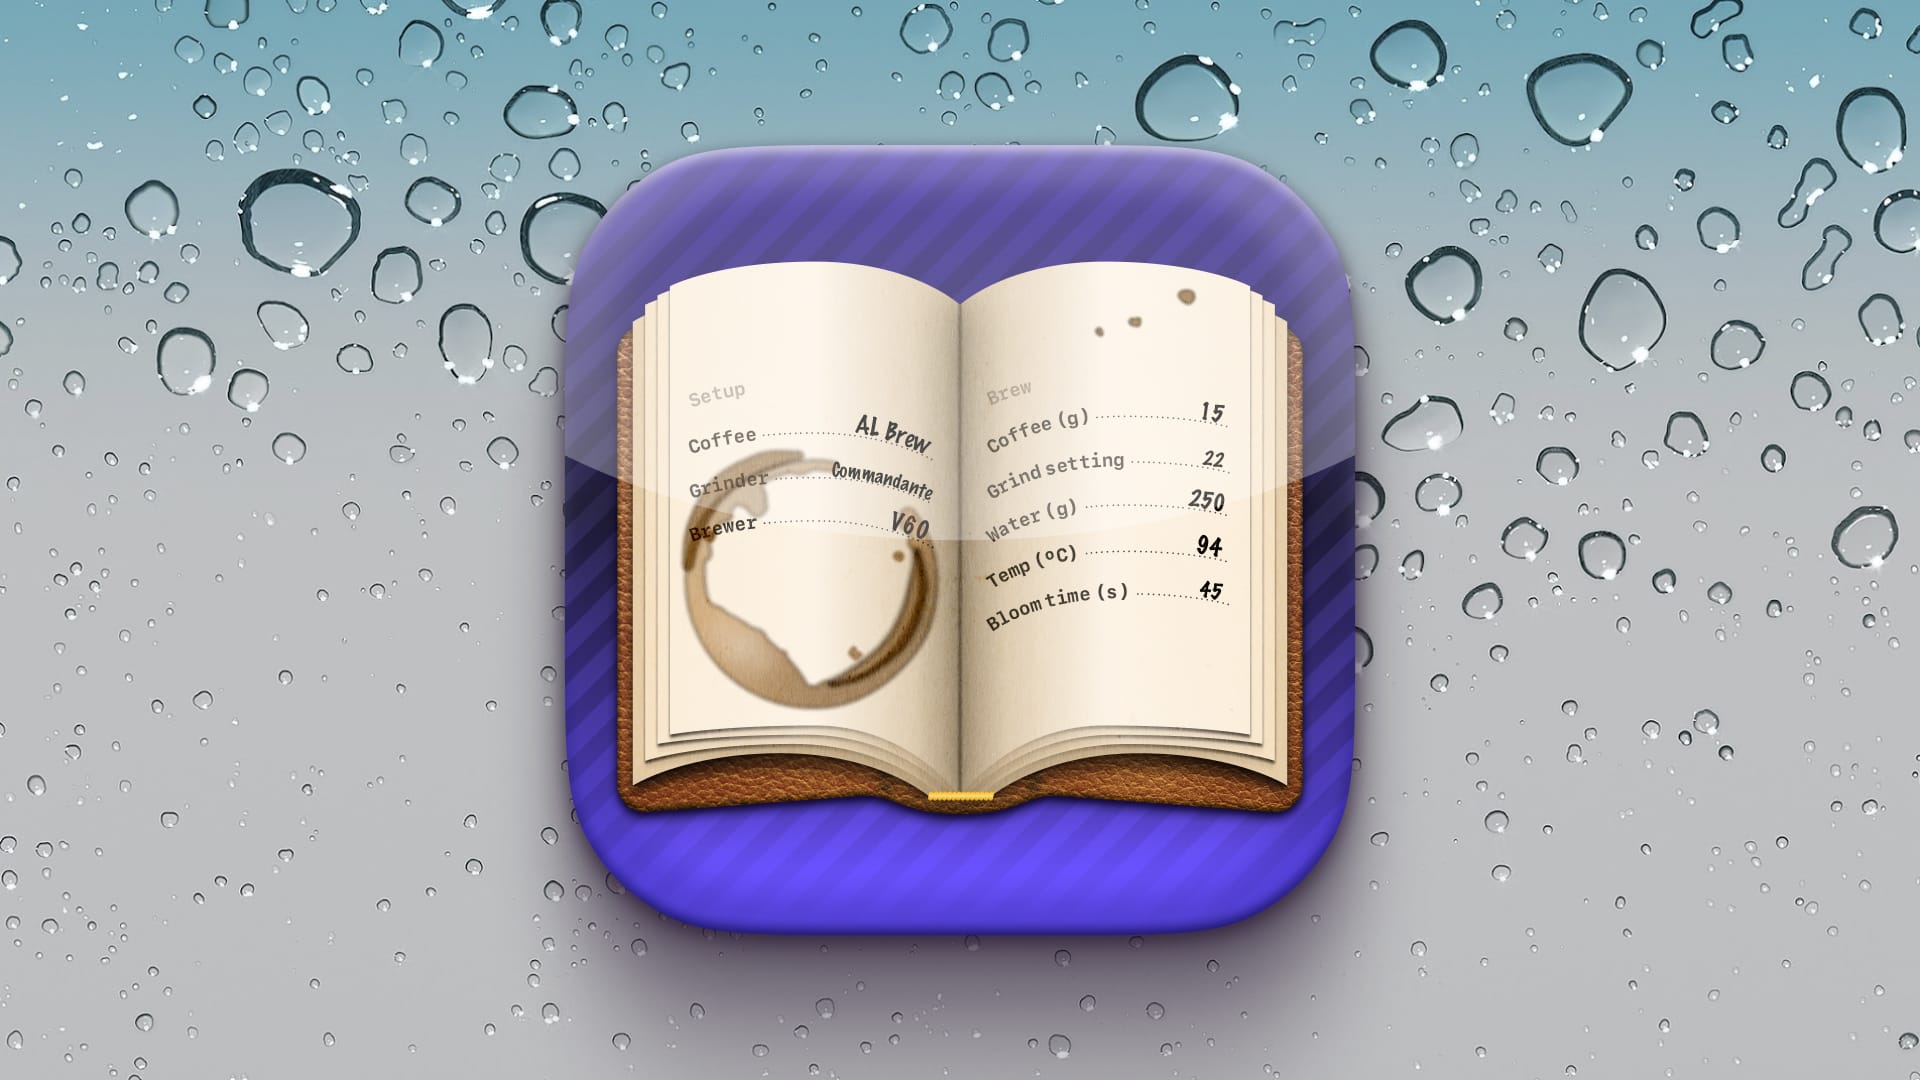 An iOS app icon depicting a coffee-stained book over a purple background. It is rendered in a detailed and textured style--the book is leather-bound with textured pages; the background is a purple, diagonally-pinstriped gradient.